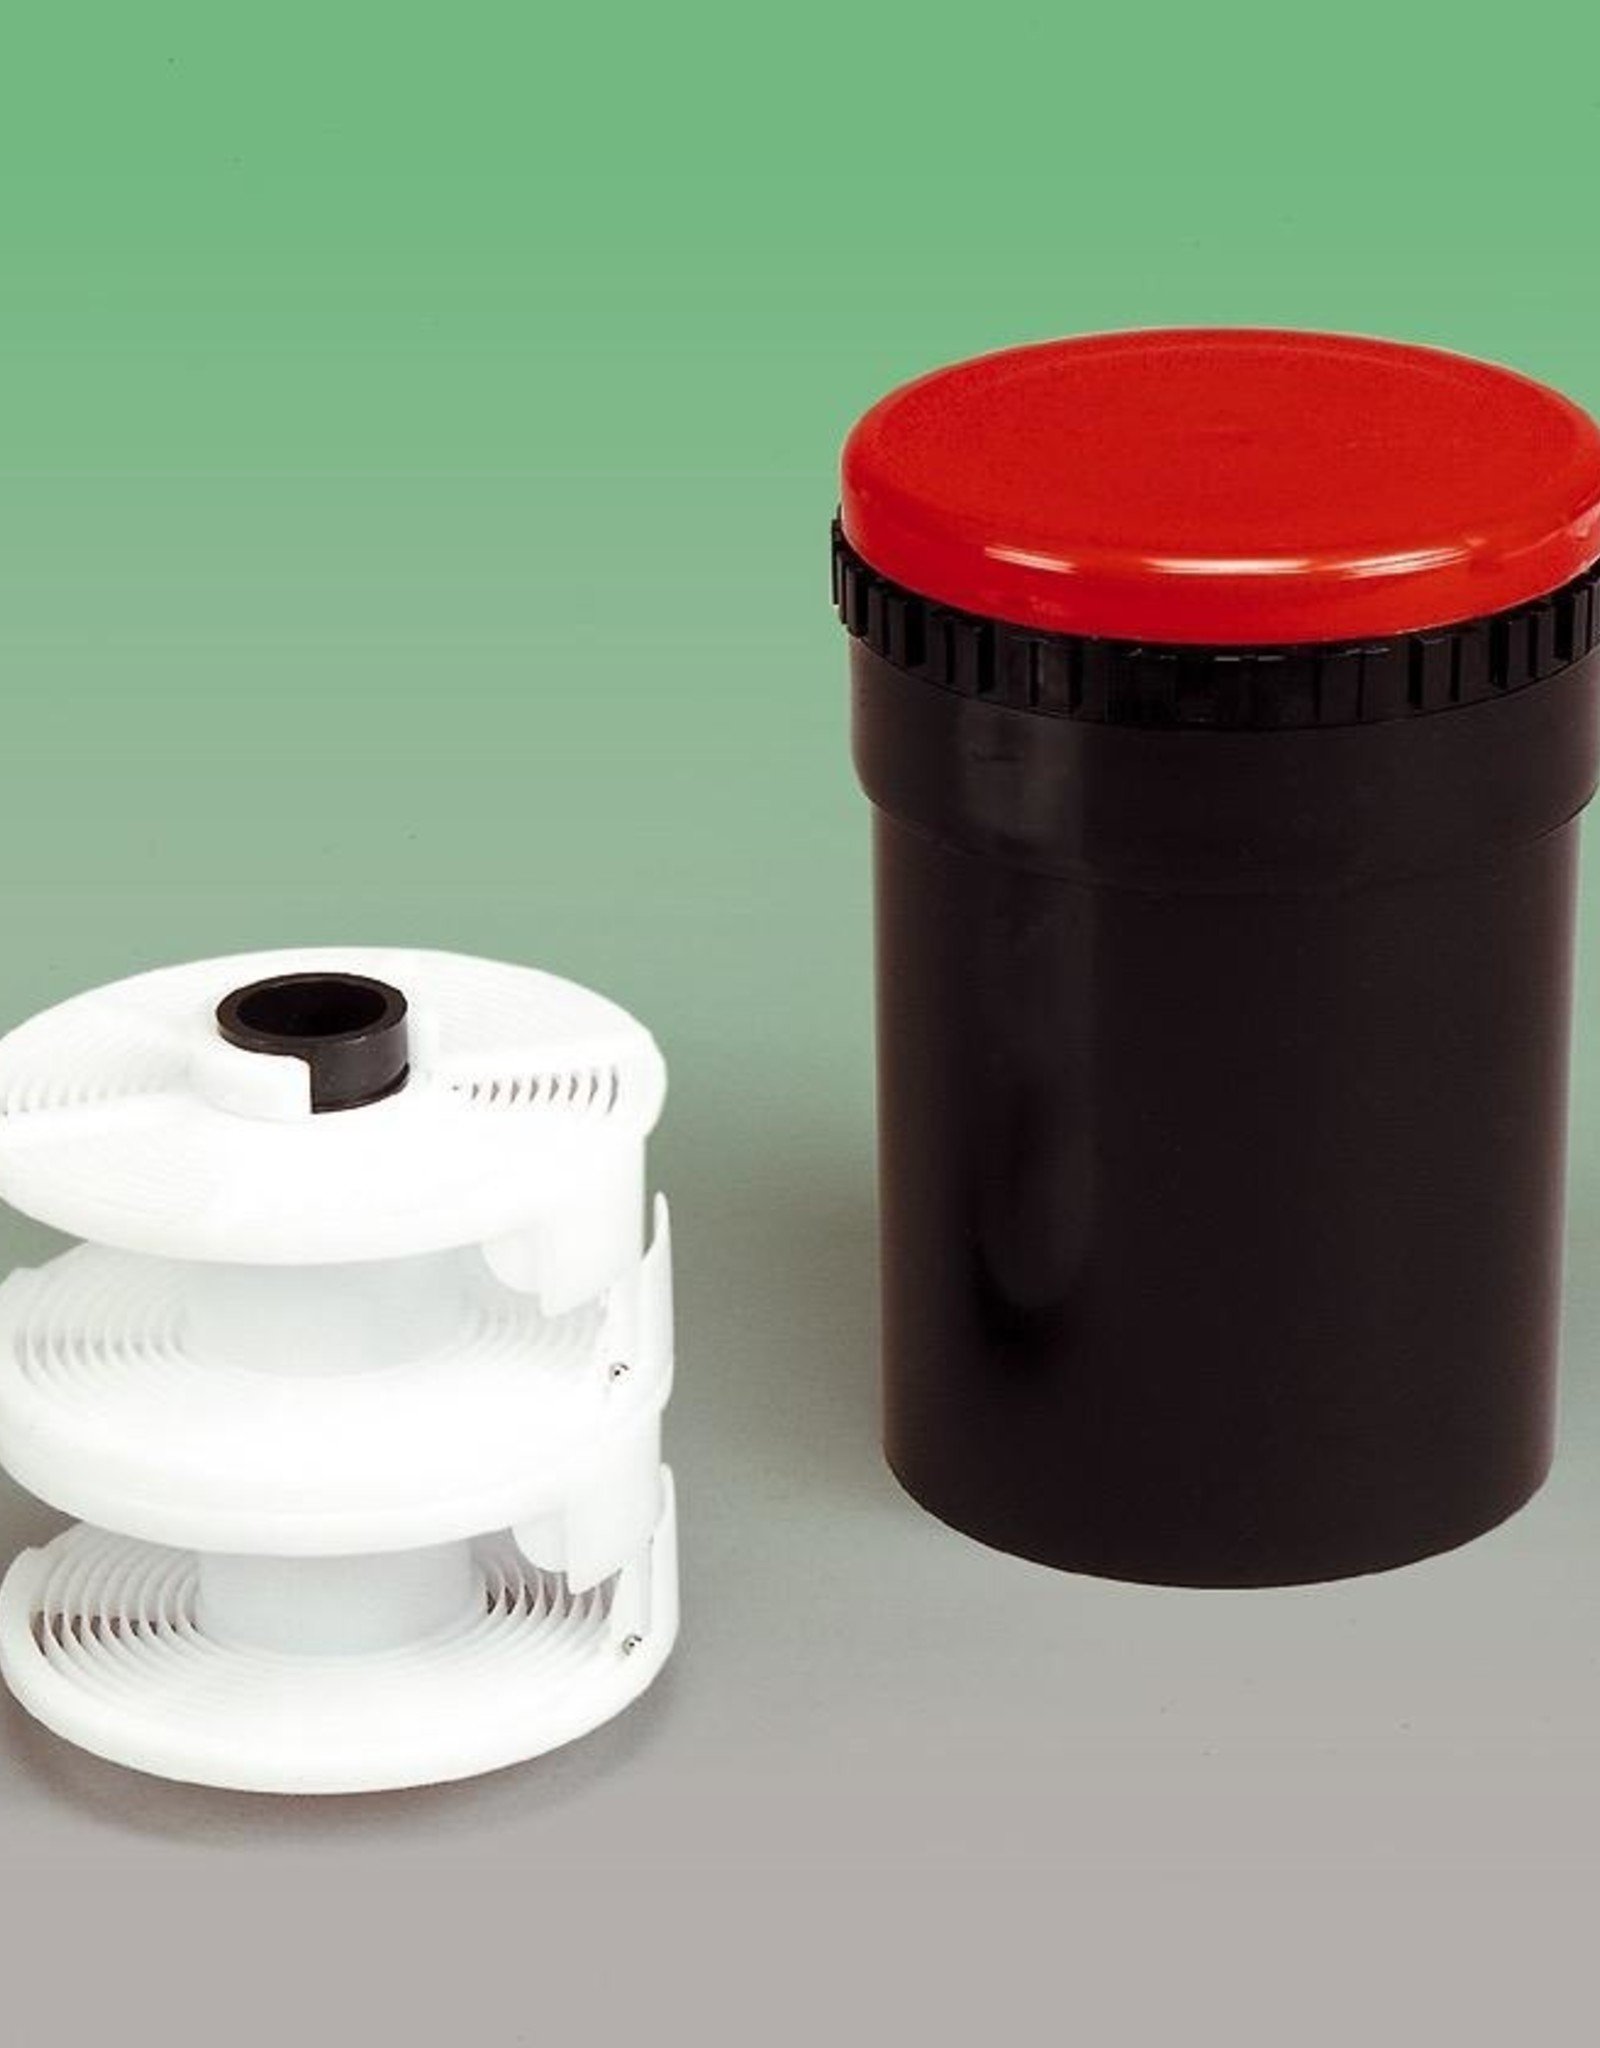 Kaiser Basic Film Processing Kit Includes: Kaiser developing tank with 2 reels, developing tank thermometer, 500ml graduate, 1L mixing jug, funnel  *Chemistry not included *A darkroom, or light tight space also required